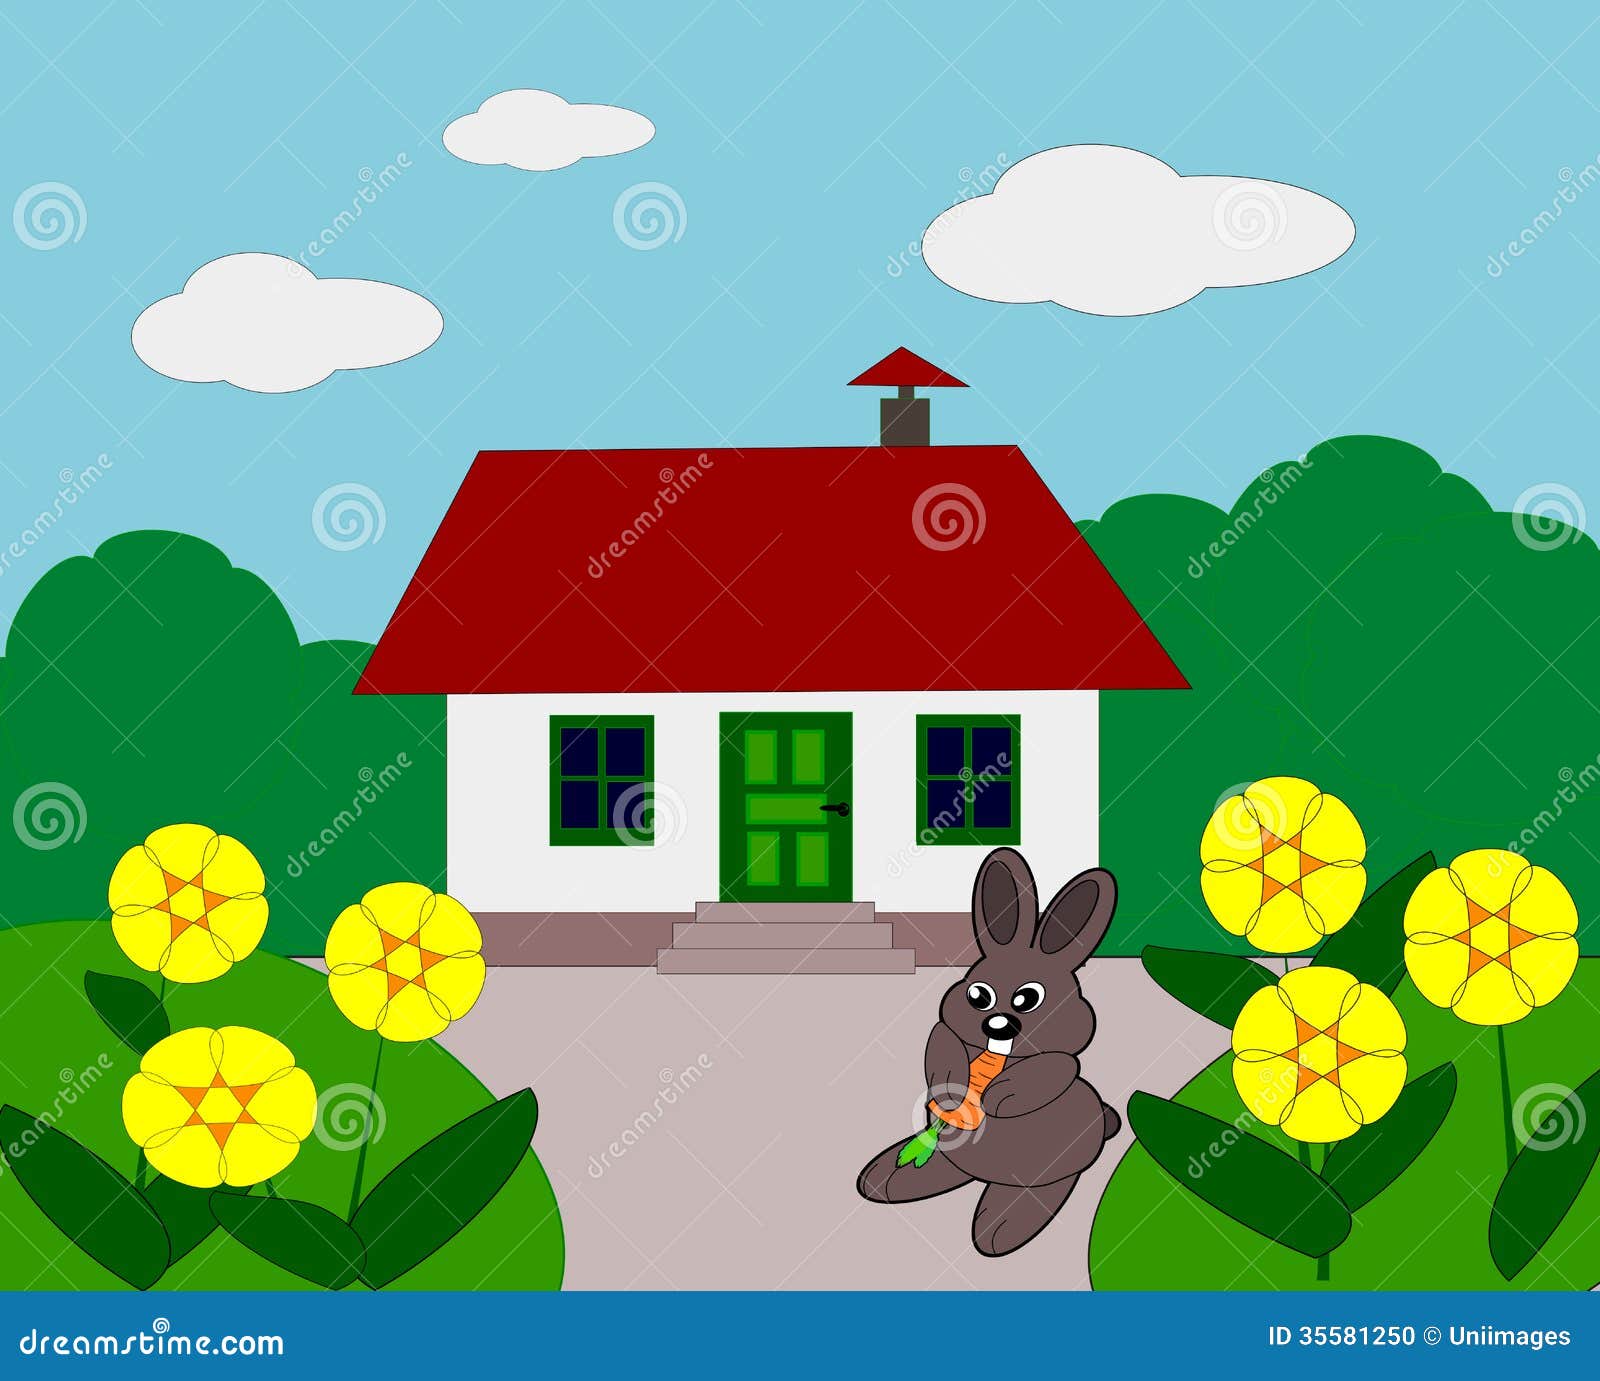 house with garden clipart - photo #20